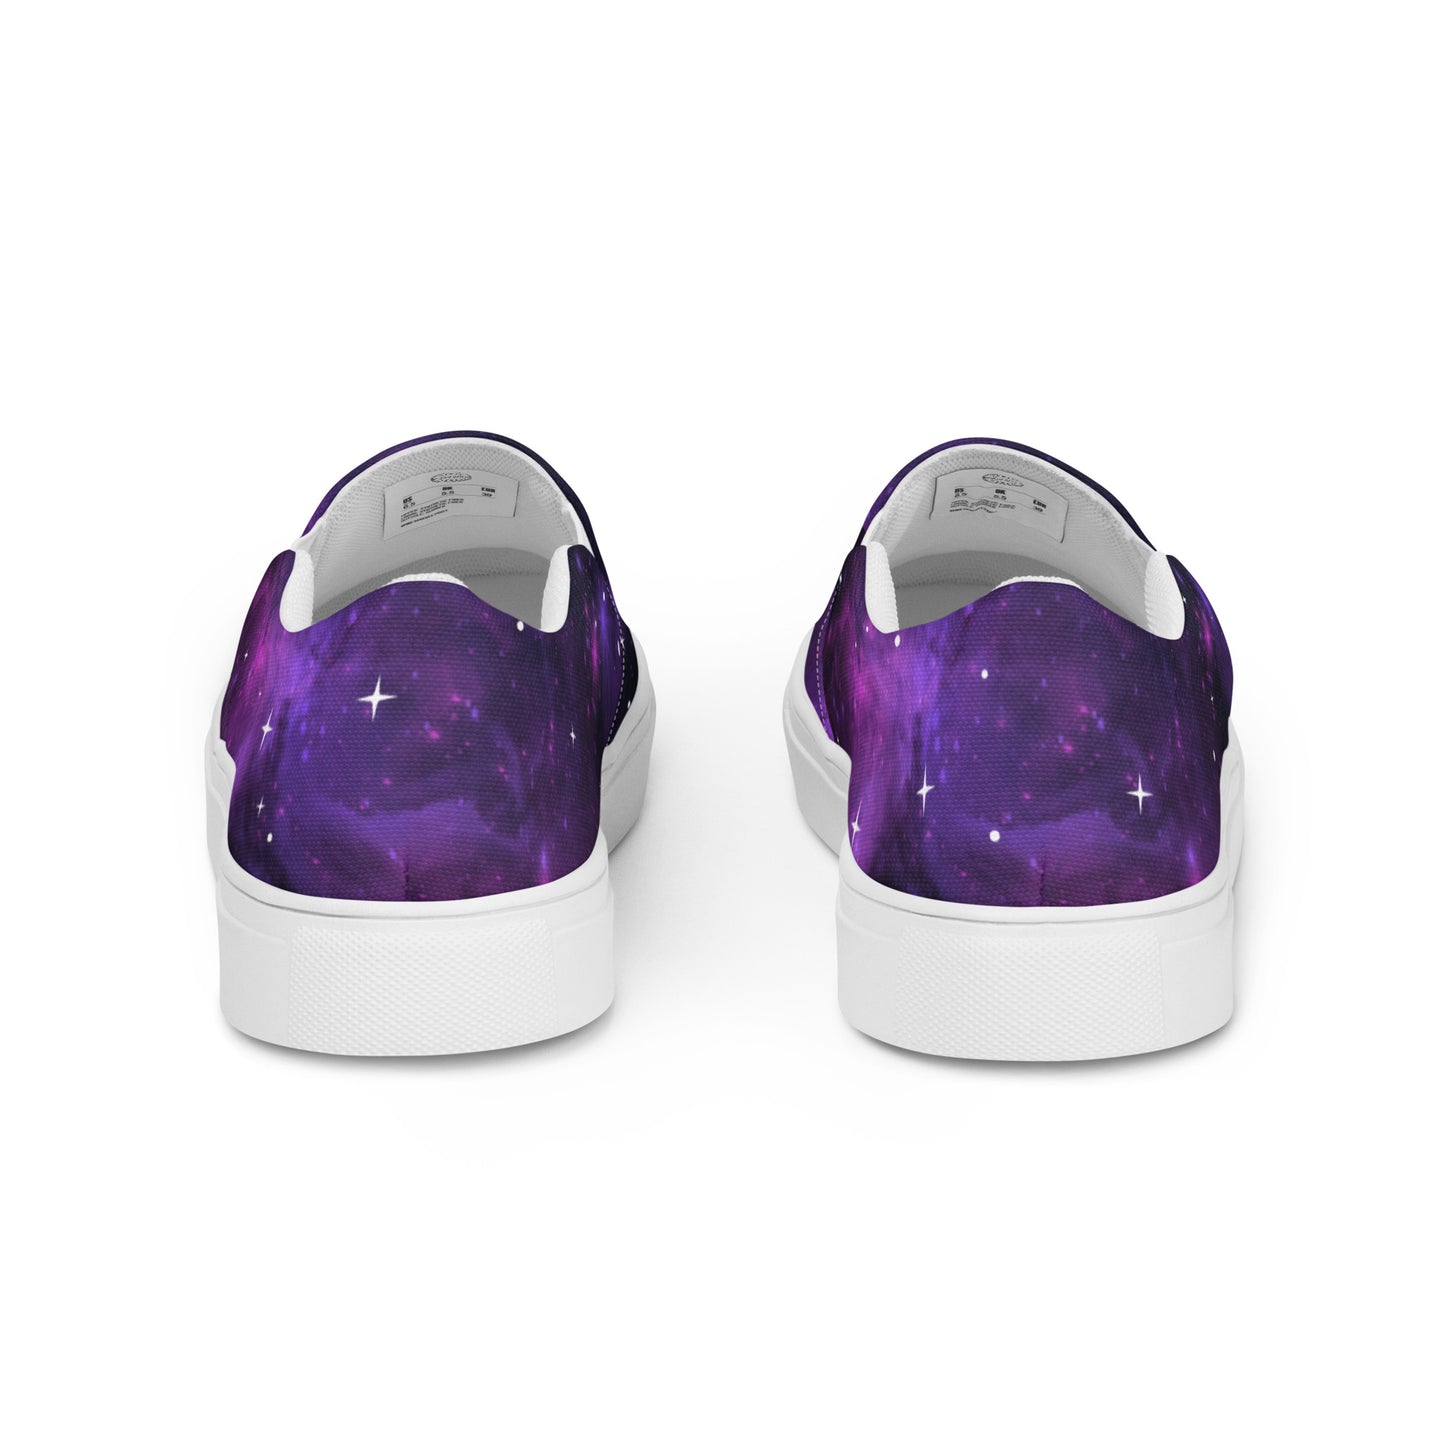 Galaxy Moon Phase Canvas Slip-on Shoes.